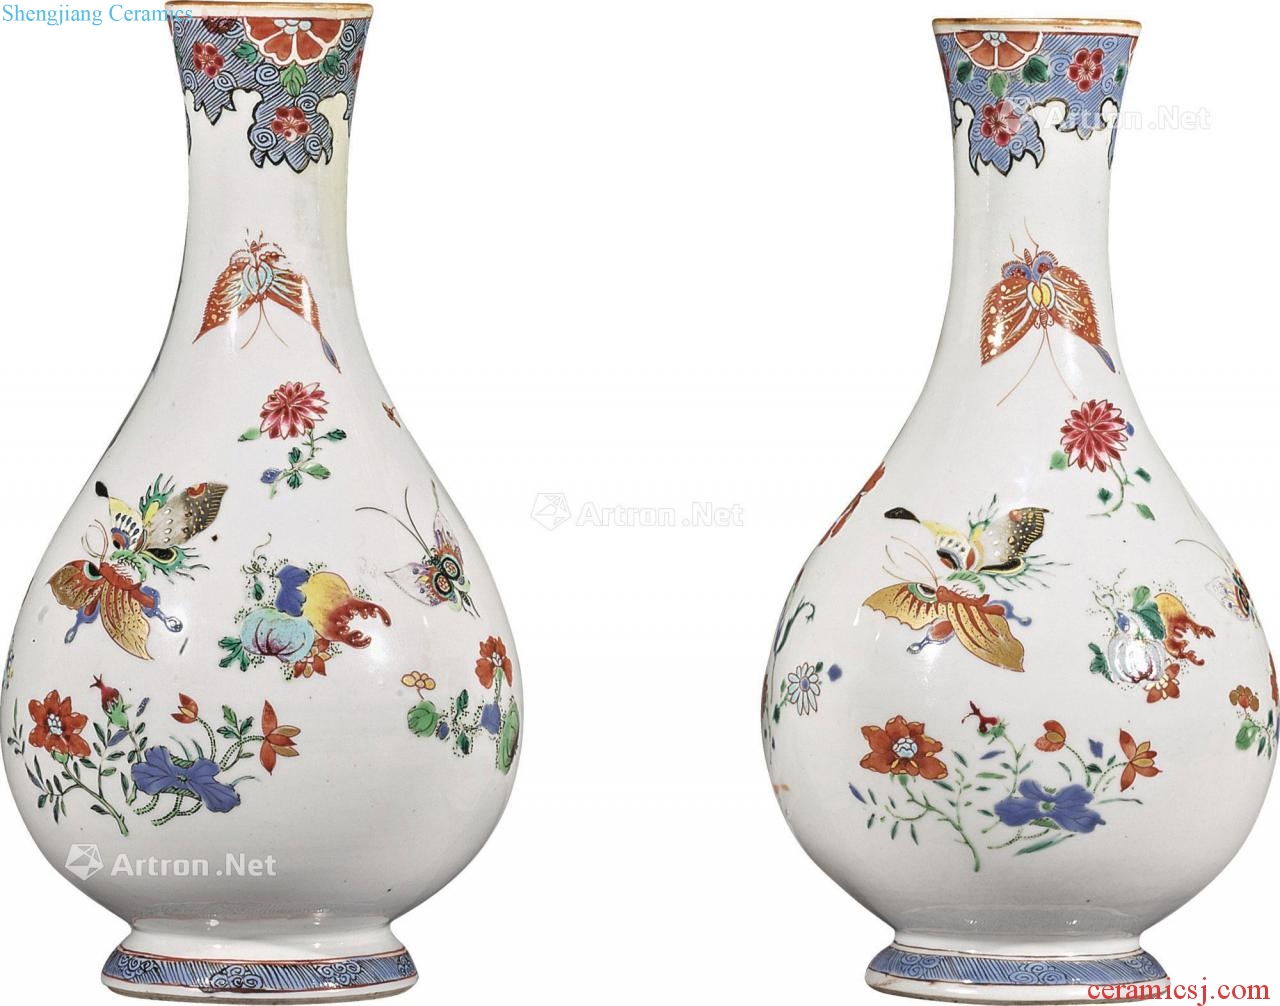 Qing qianlong about 1740 to 1745 Pastel flower butterfly figure bottles (a)